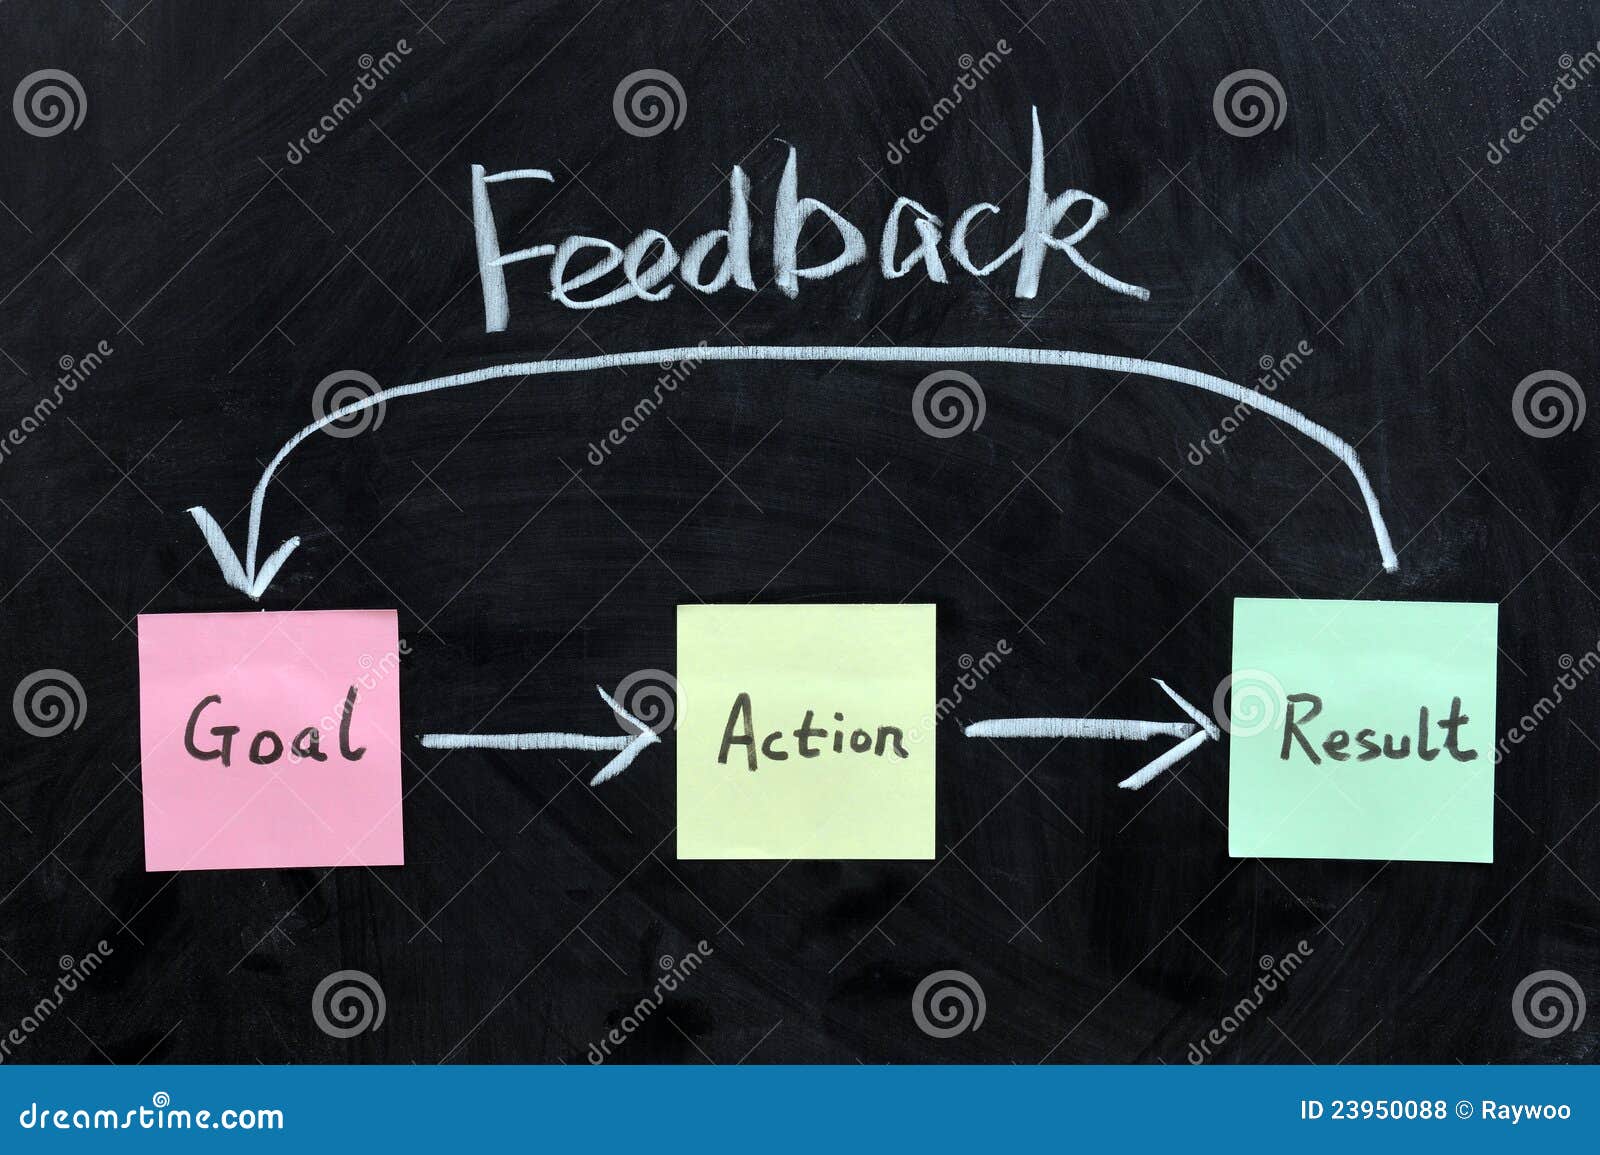 goal, action, result and feedback